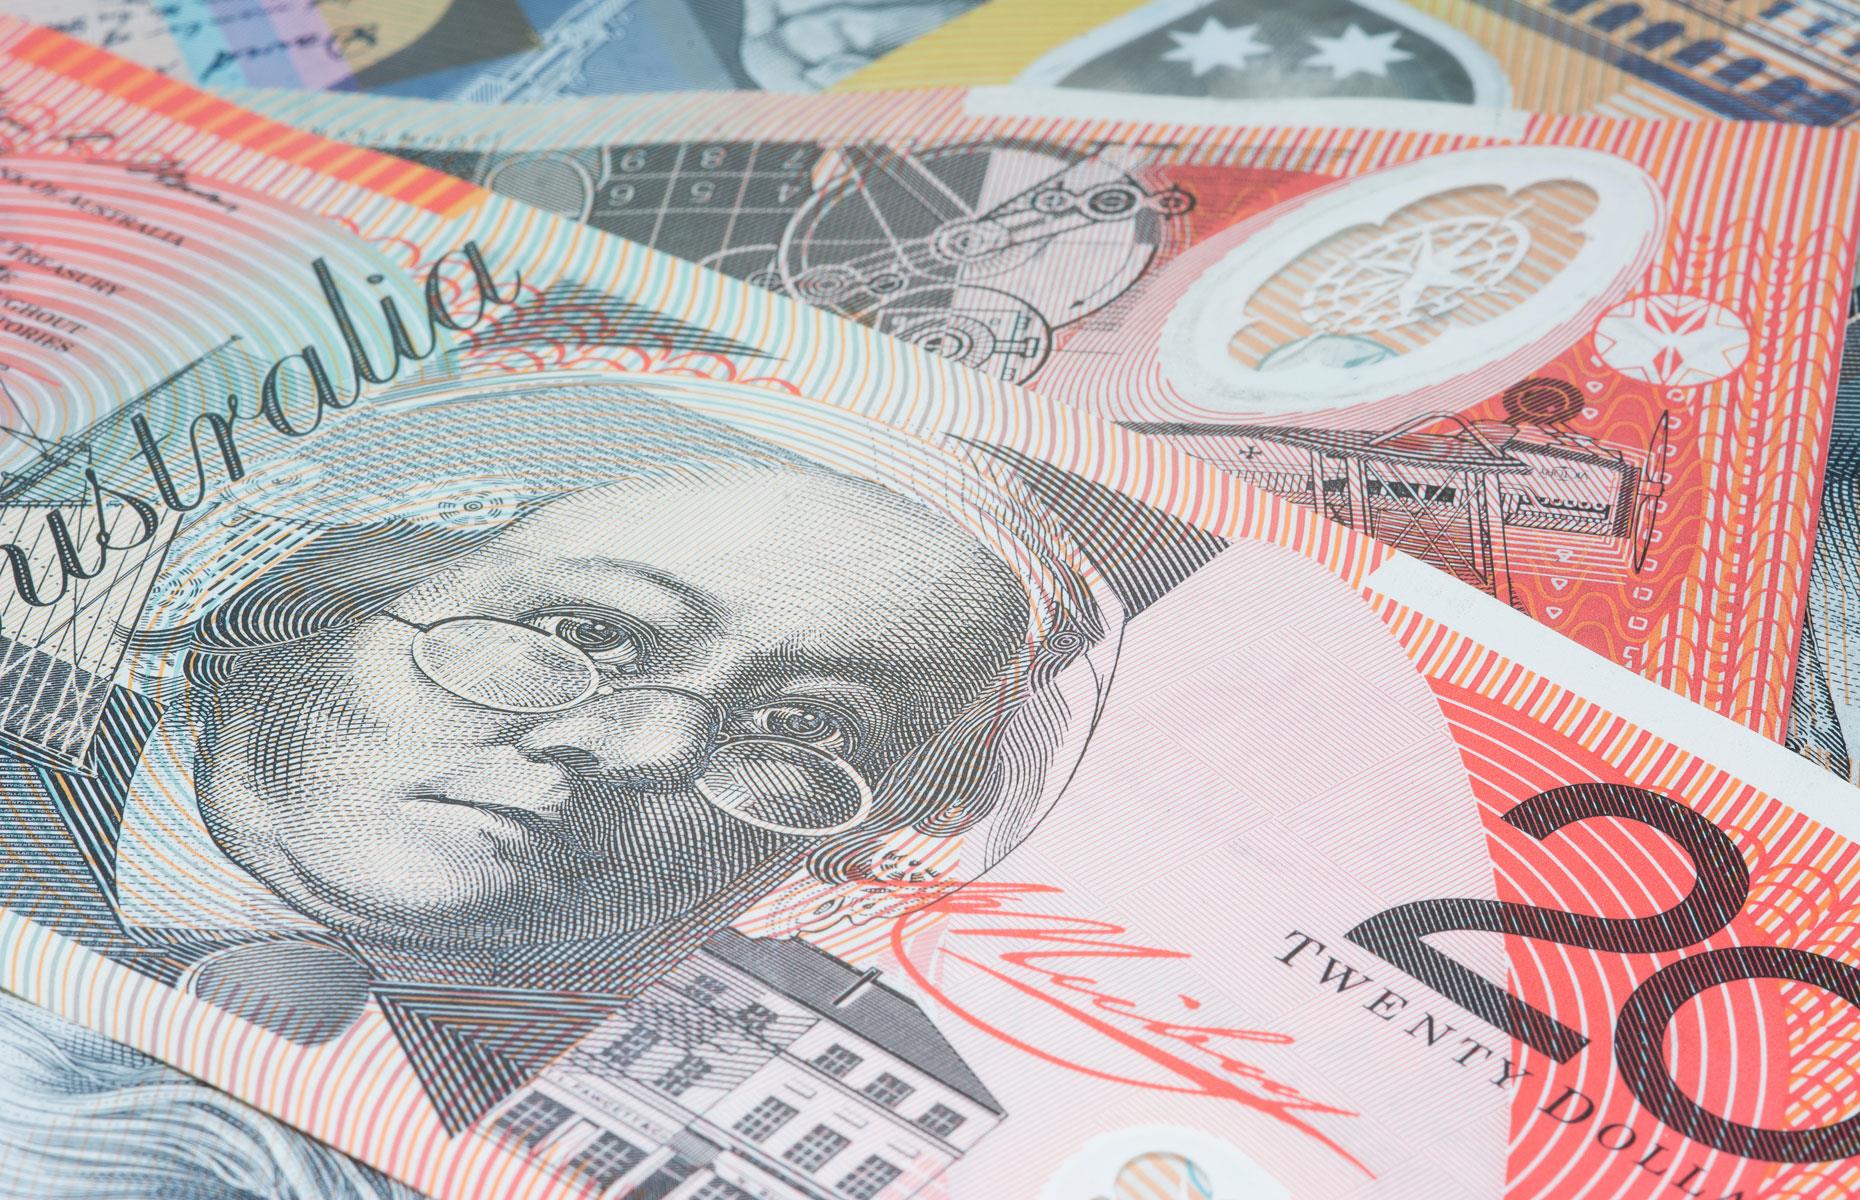 Polymer banknotes are three times cleaner than regular bills